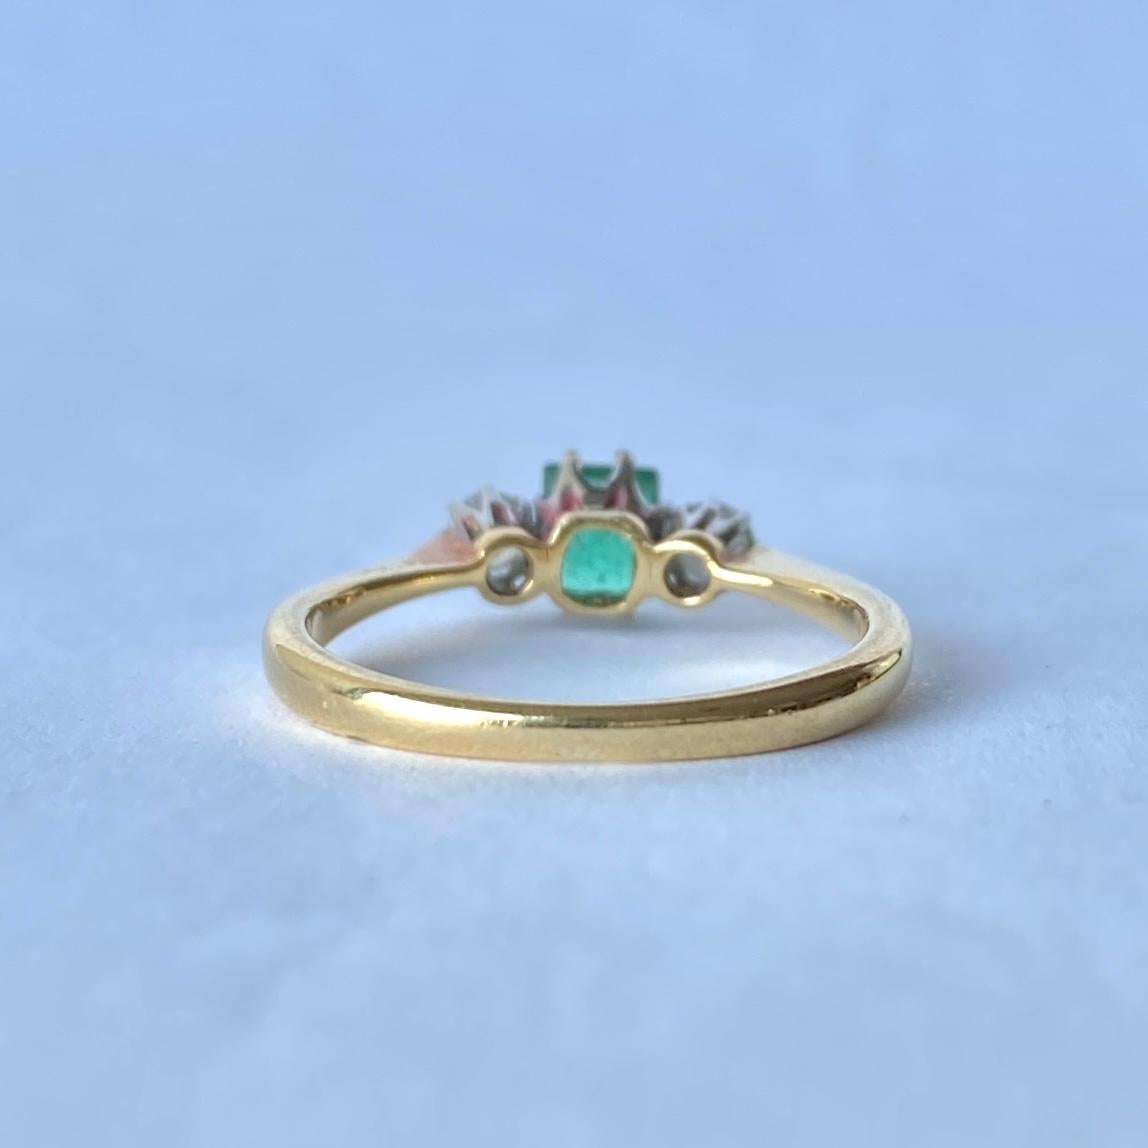 The central emerald is so bright and beautiful and measures 40pts. Sat either side it are two bright shimmering old European cut diamonds each measuring 7pts. The ring is modelled in 18ct gold.

Ring Size: J 1/2 or 5 
Width: 5mm
Height Off Finger: